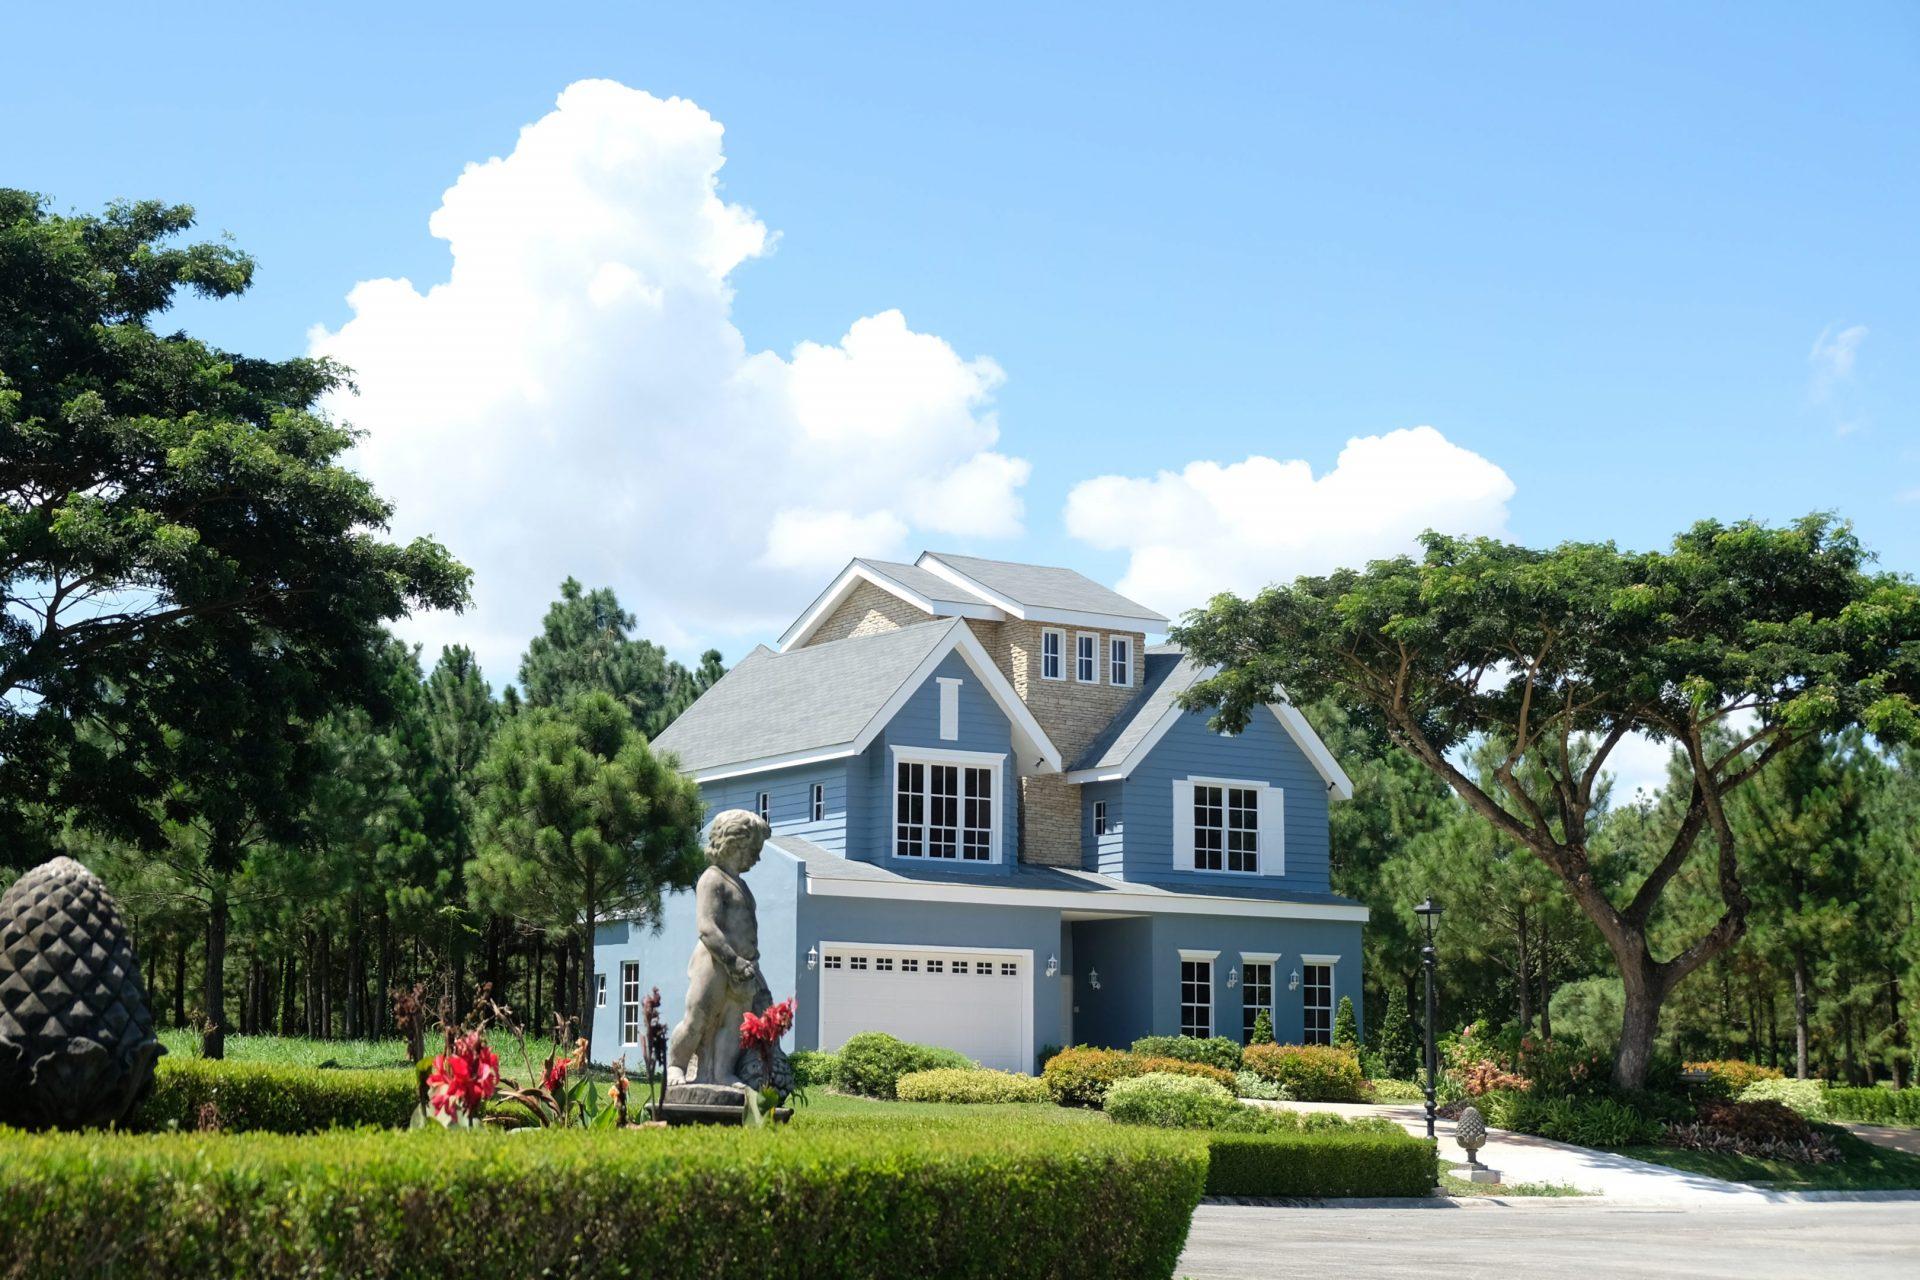 Build timeless memories with your family in old American inspired luxury homes in Brittany Sta. Rosa